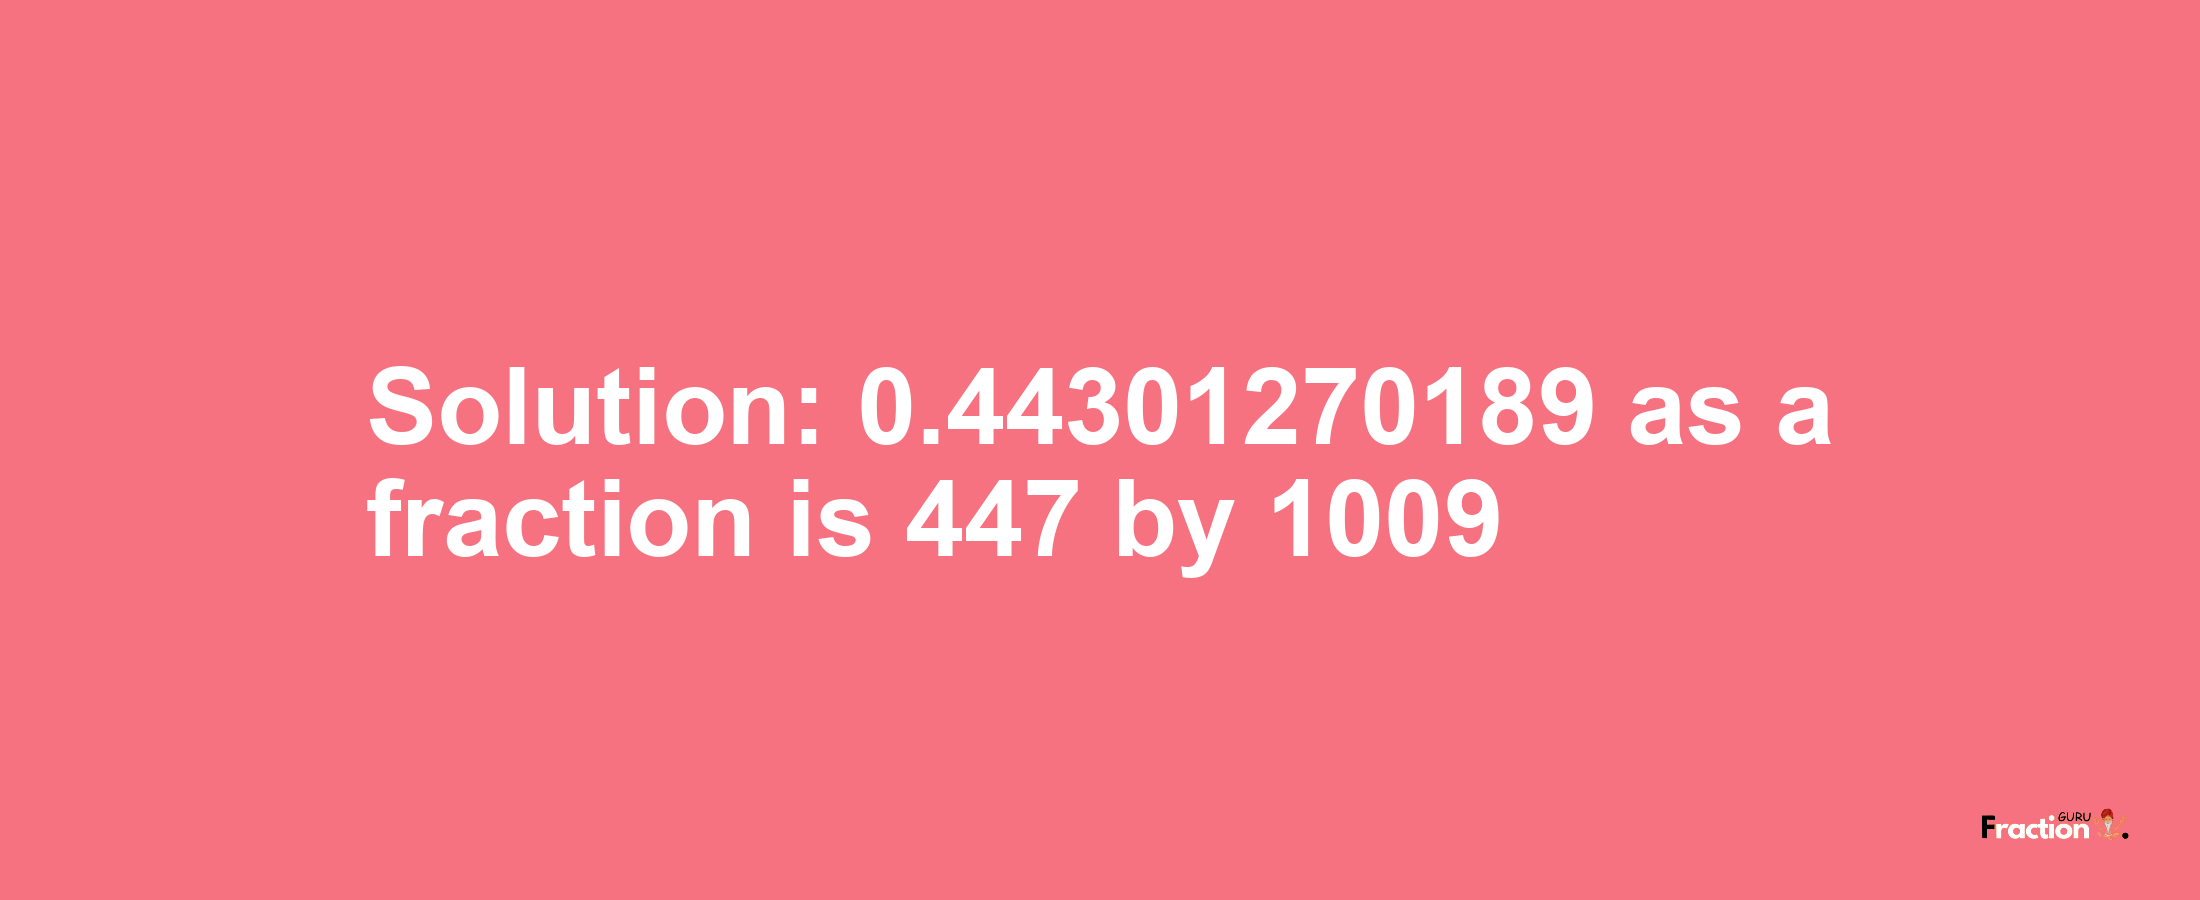 Solution:0.44301270189 as a fraction is 447/1009